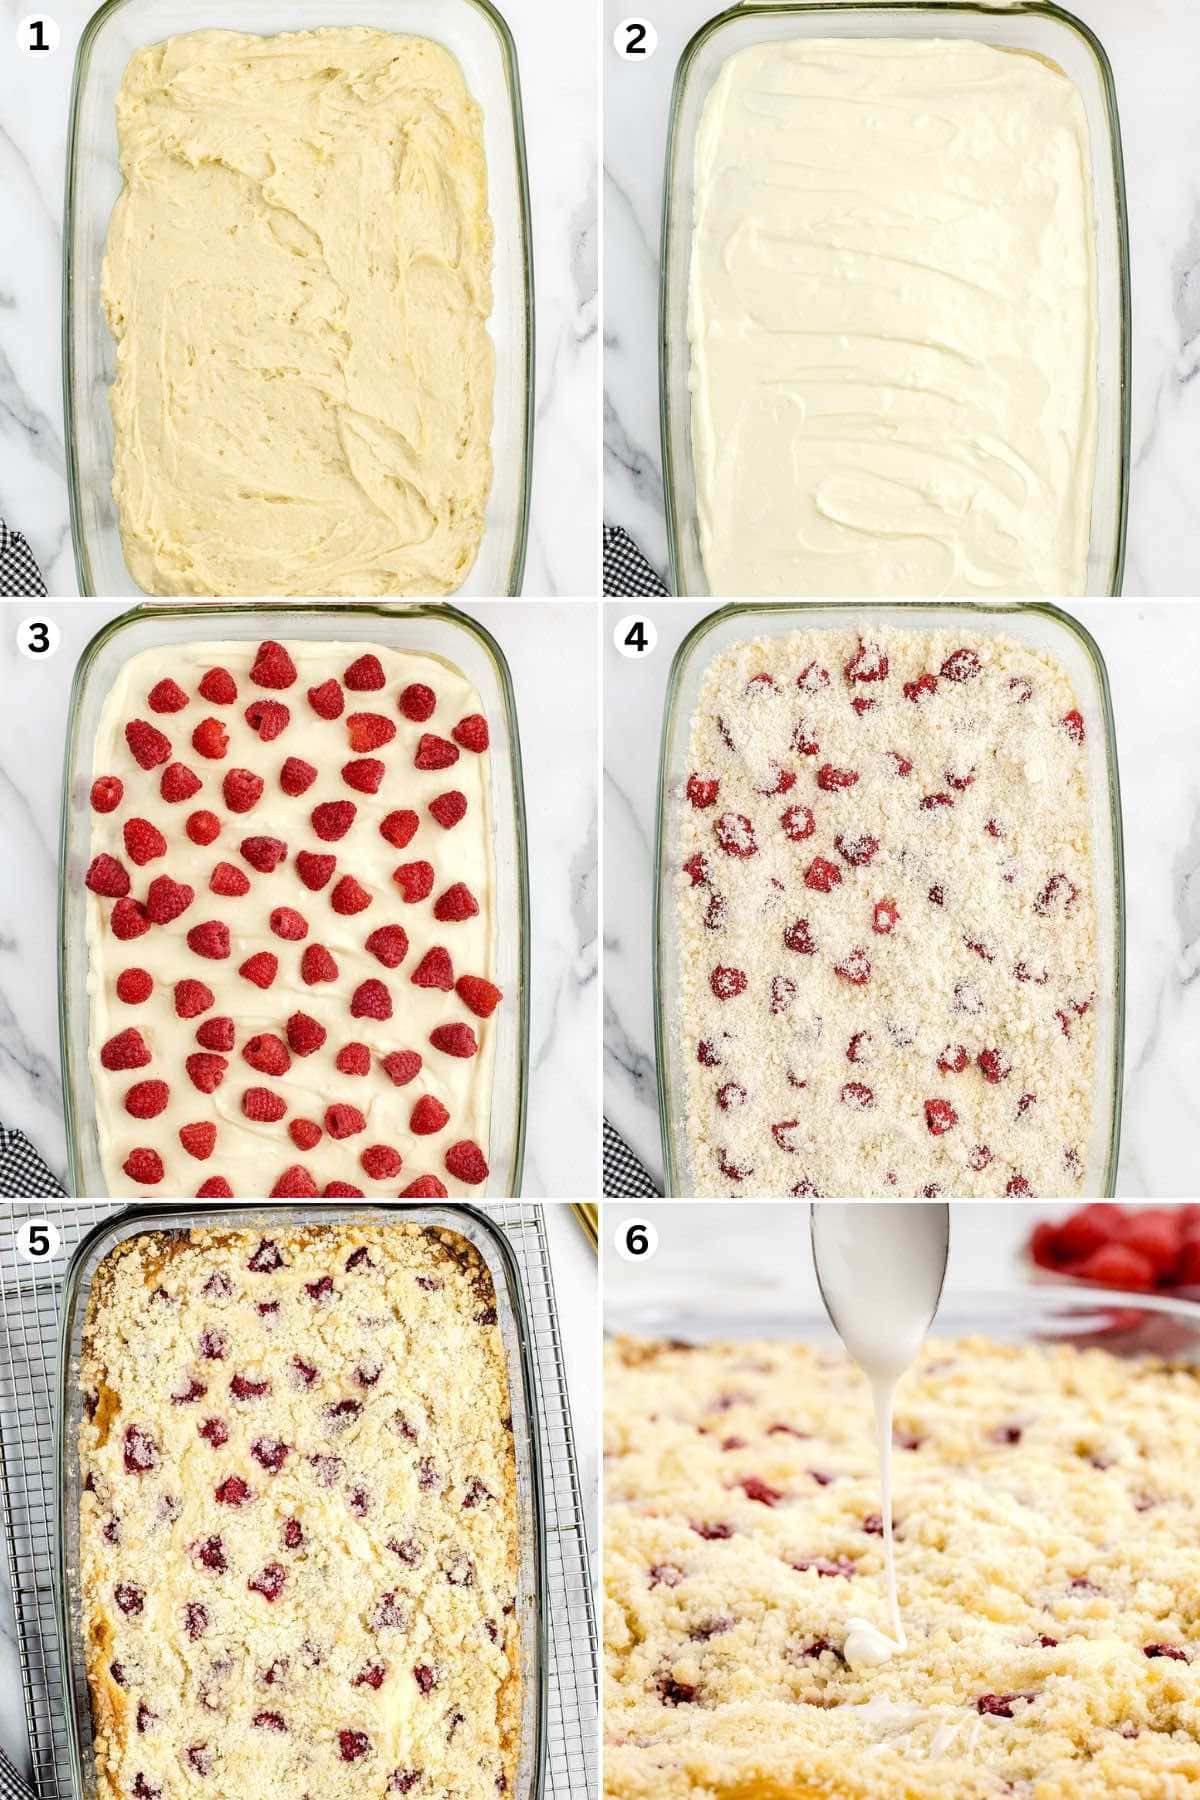 Make the flour and butter mixture. Create the cake batter and the cream cheese mixture. Sprinkle the crumbly mixture over the top of the raspberry and cream cheese layer. Bake and whisk together the powdered sugar and milk then drizzle over the cake.